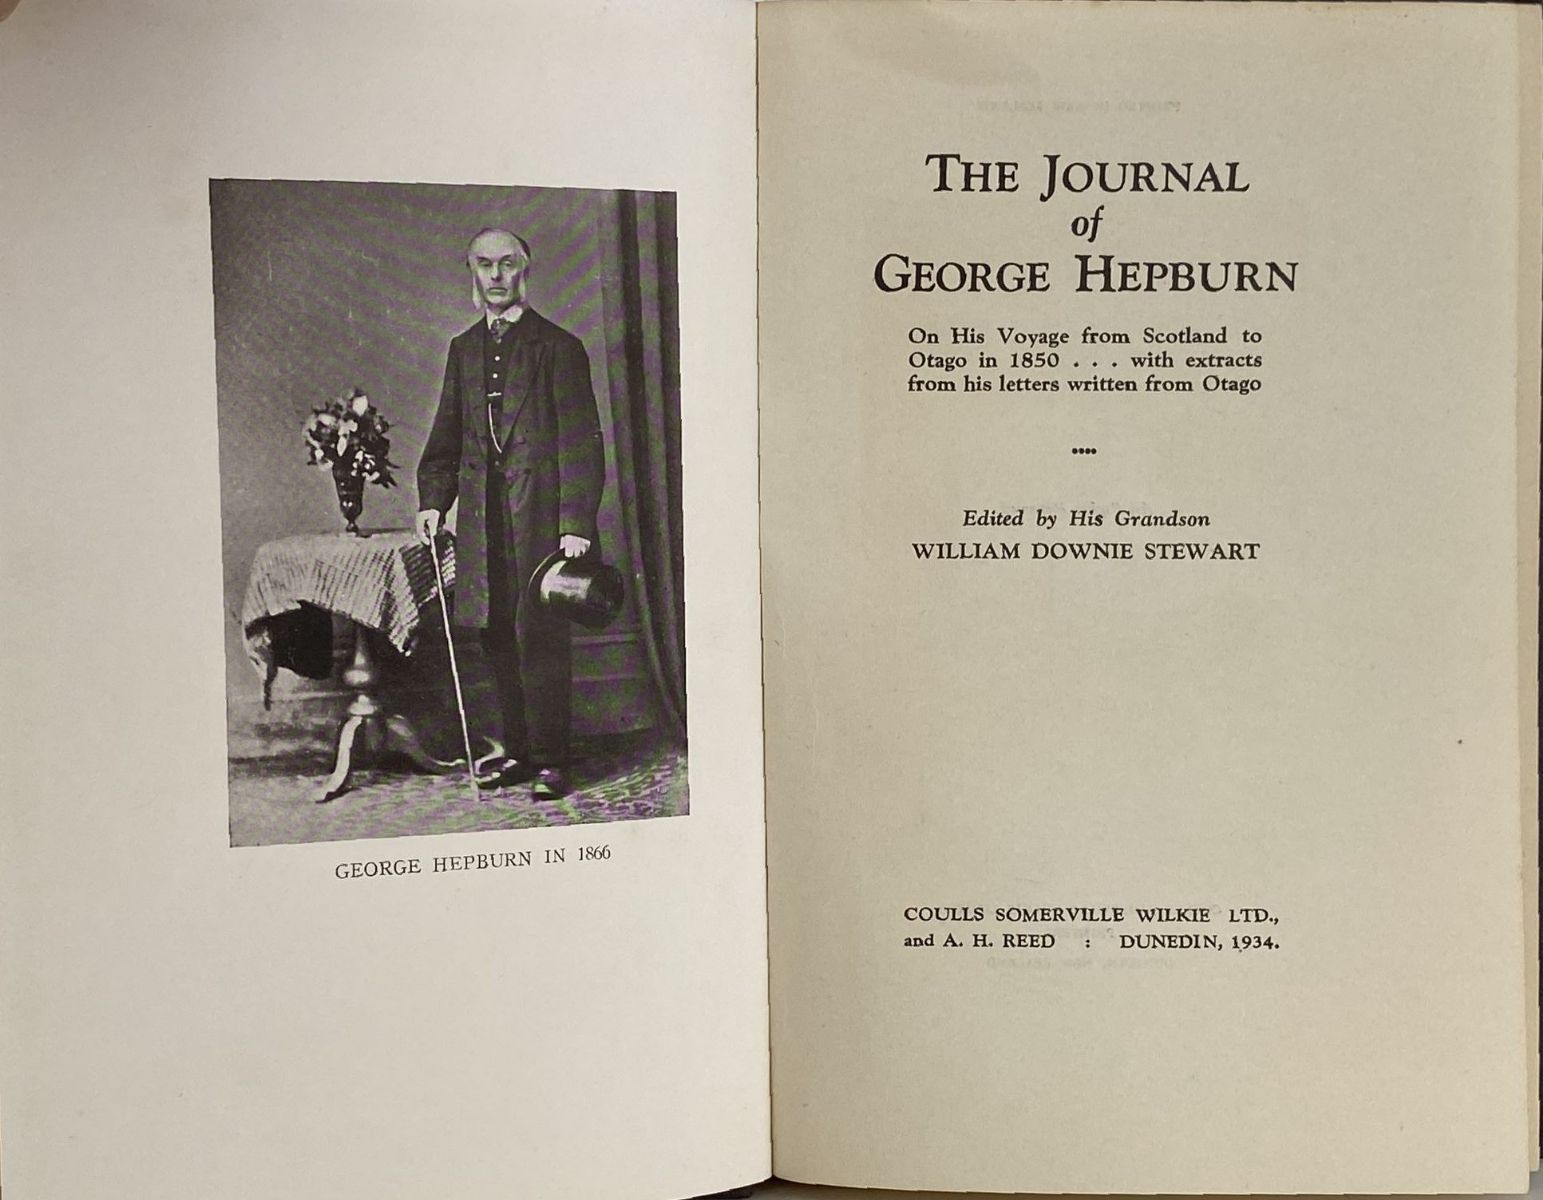 THE DIARY OF GEORGE HEPBURN on his voyage from Scotland to Otago in 1850